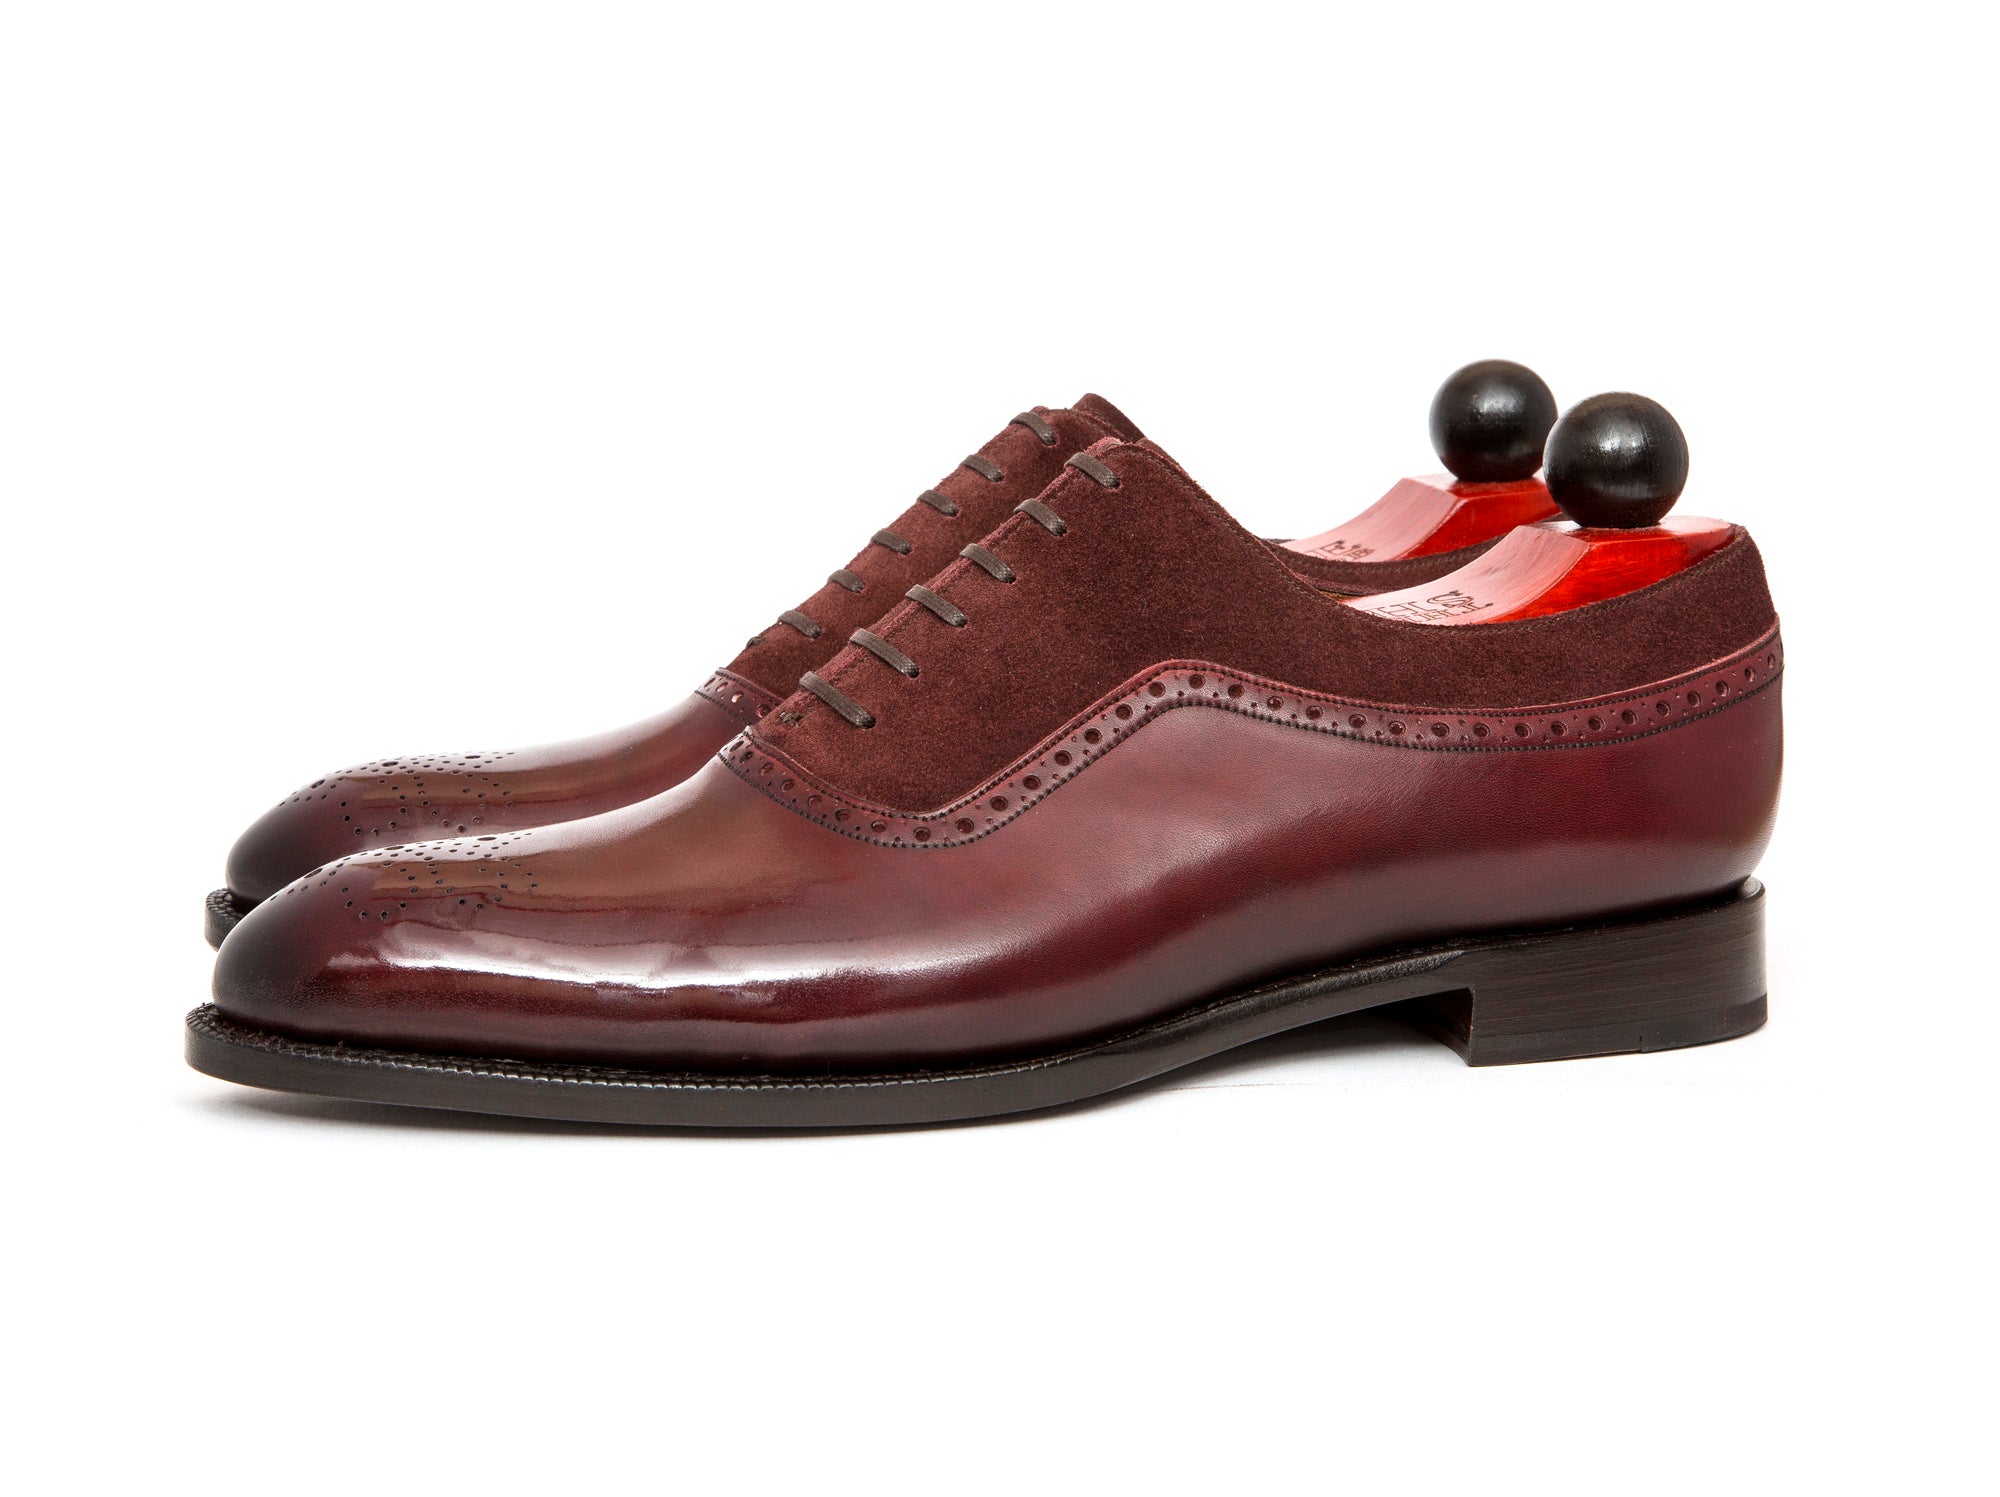 Roosevelt - MTO - Burgundy Calf / Burgundy Suede - NGT Last - Single Leather Sole